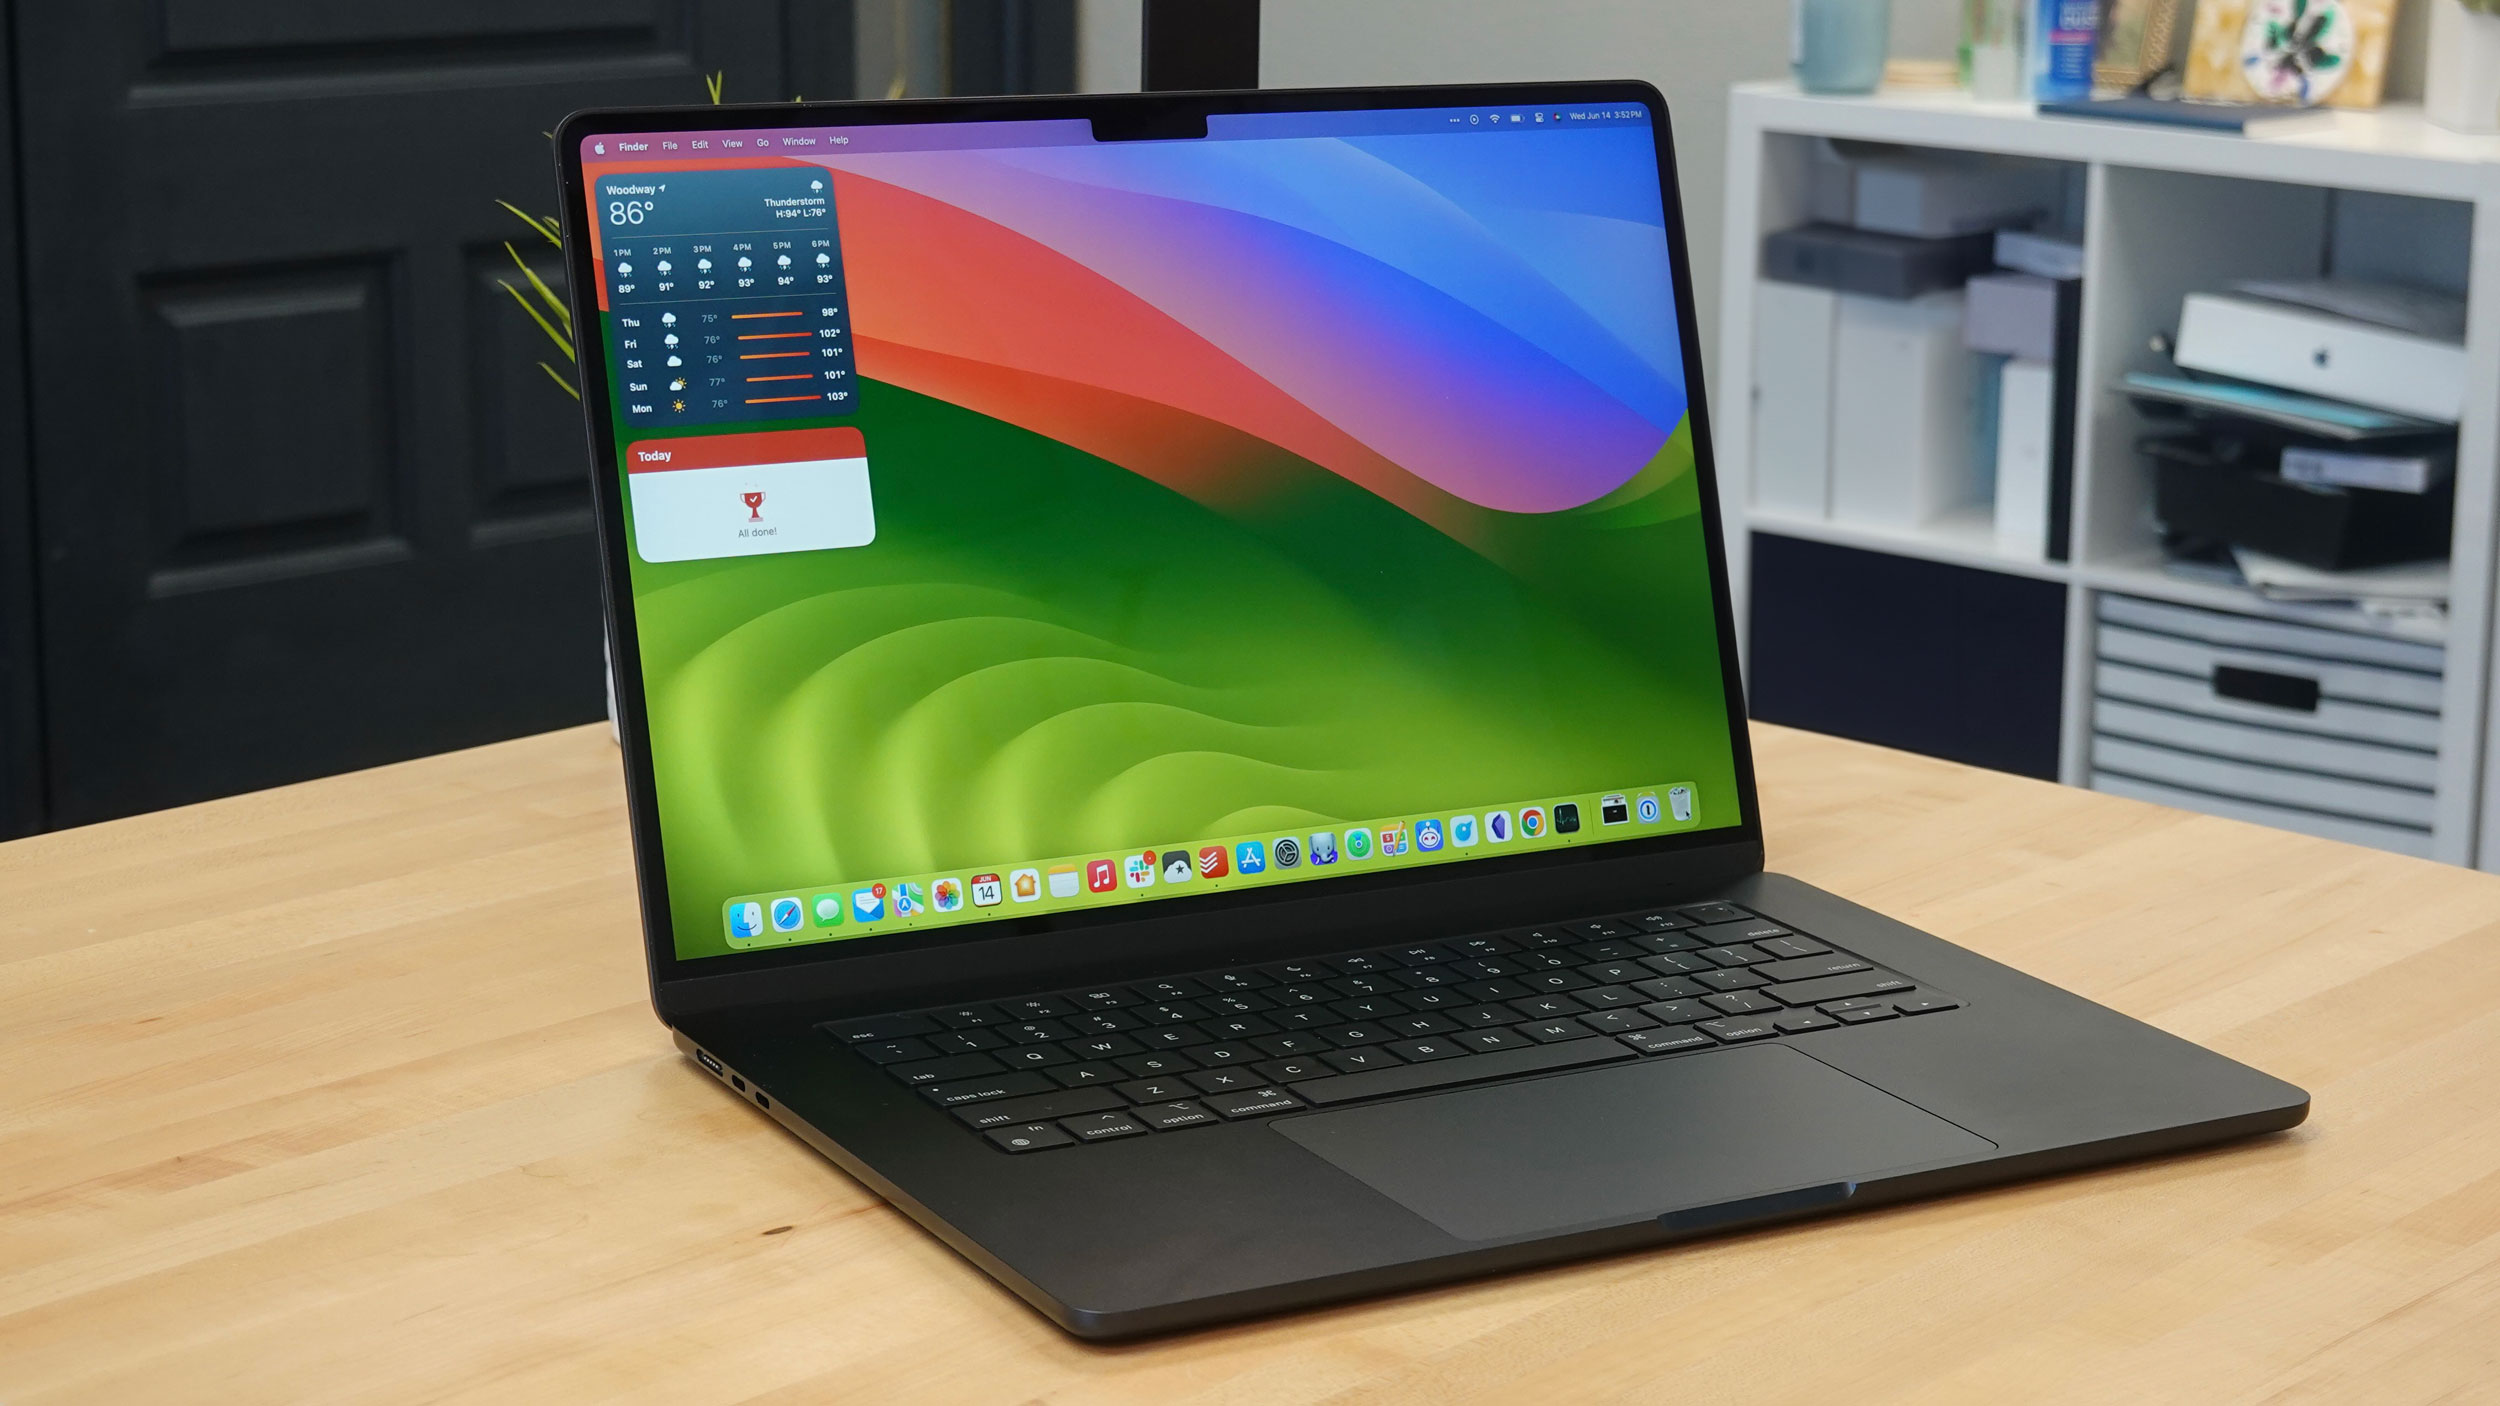 MacBook Pro delayed to August for new orders - 9to5Mac